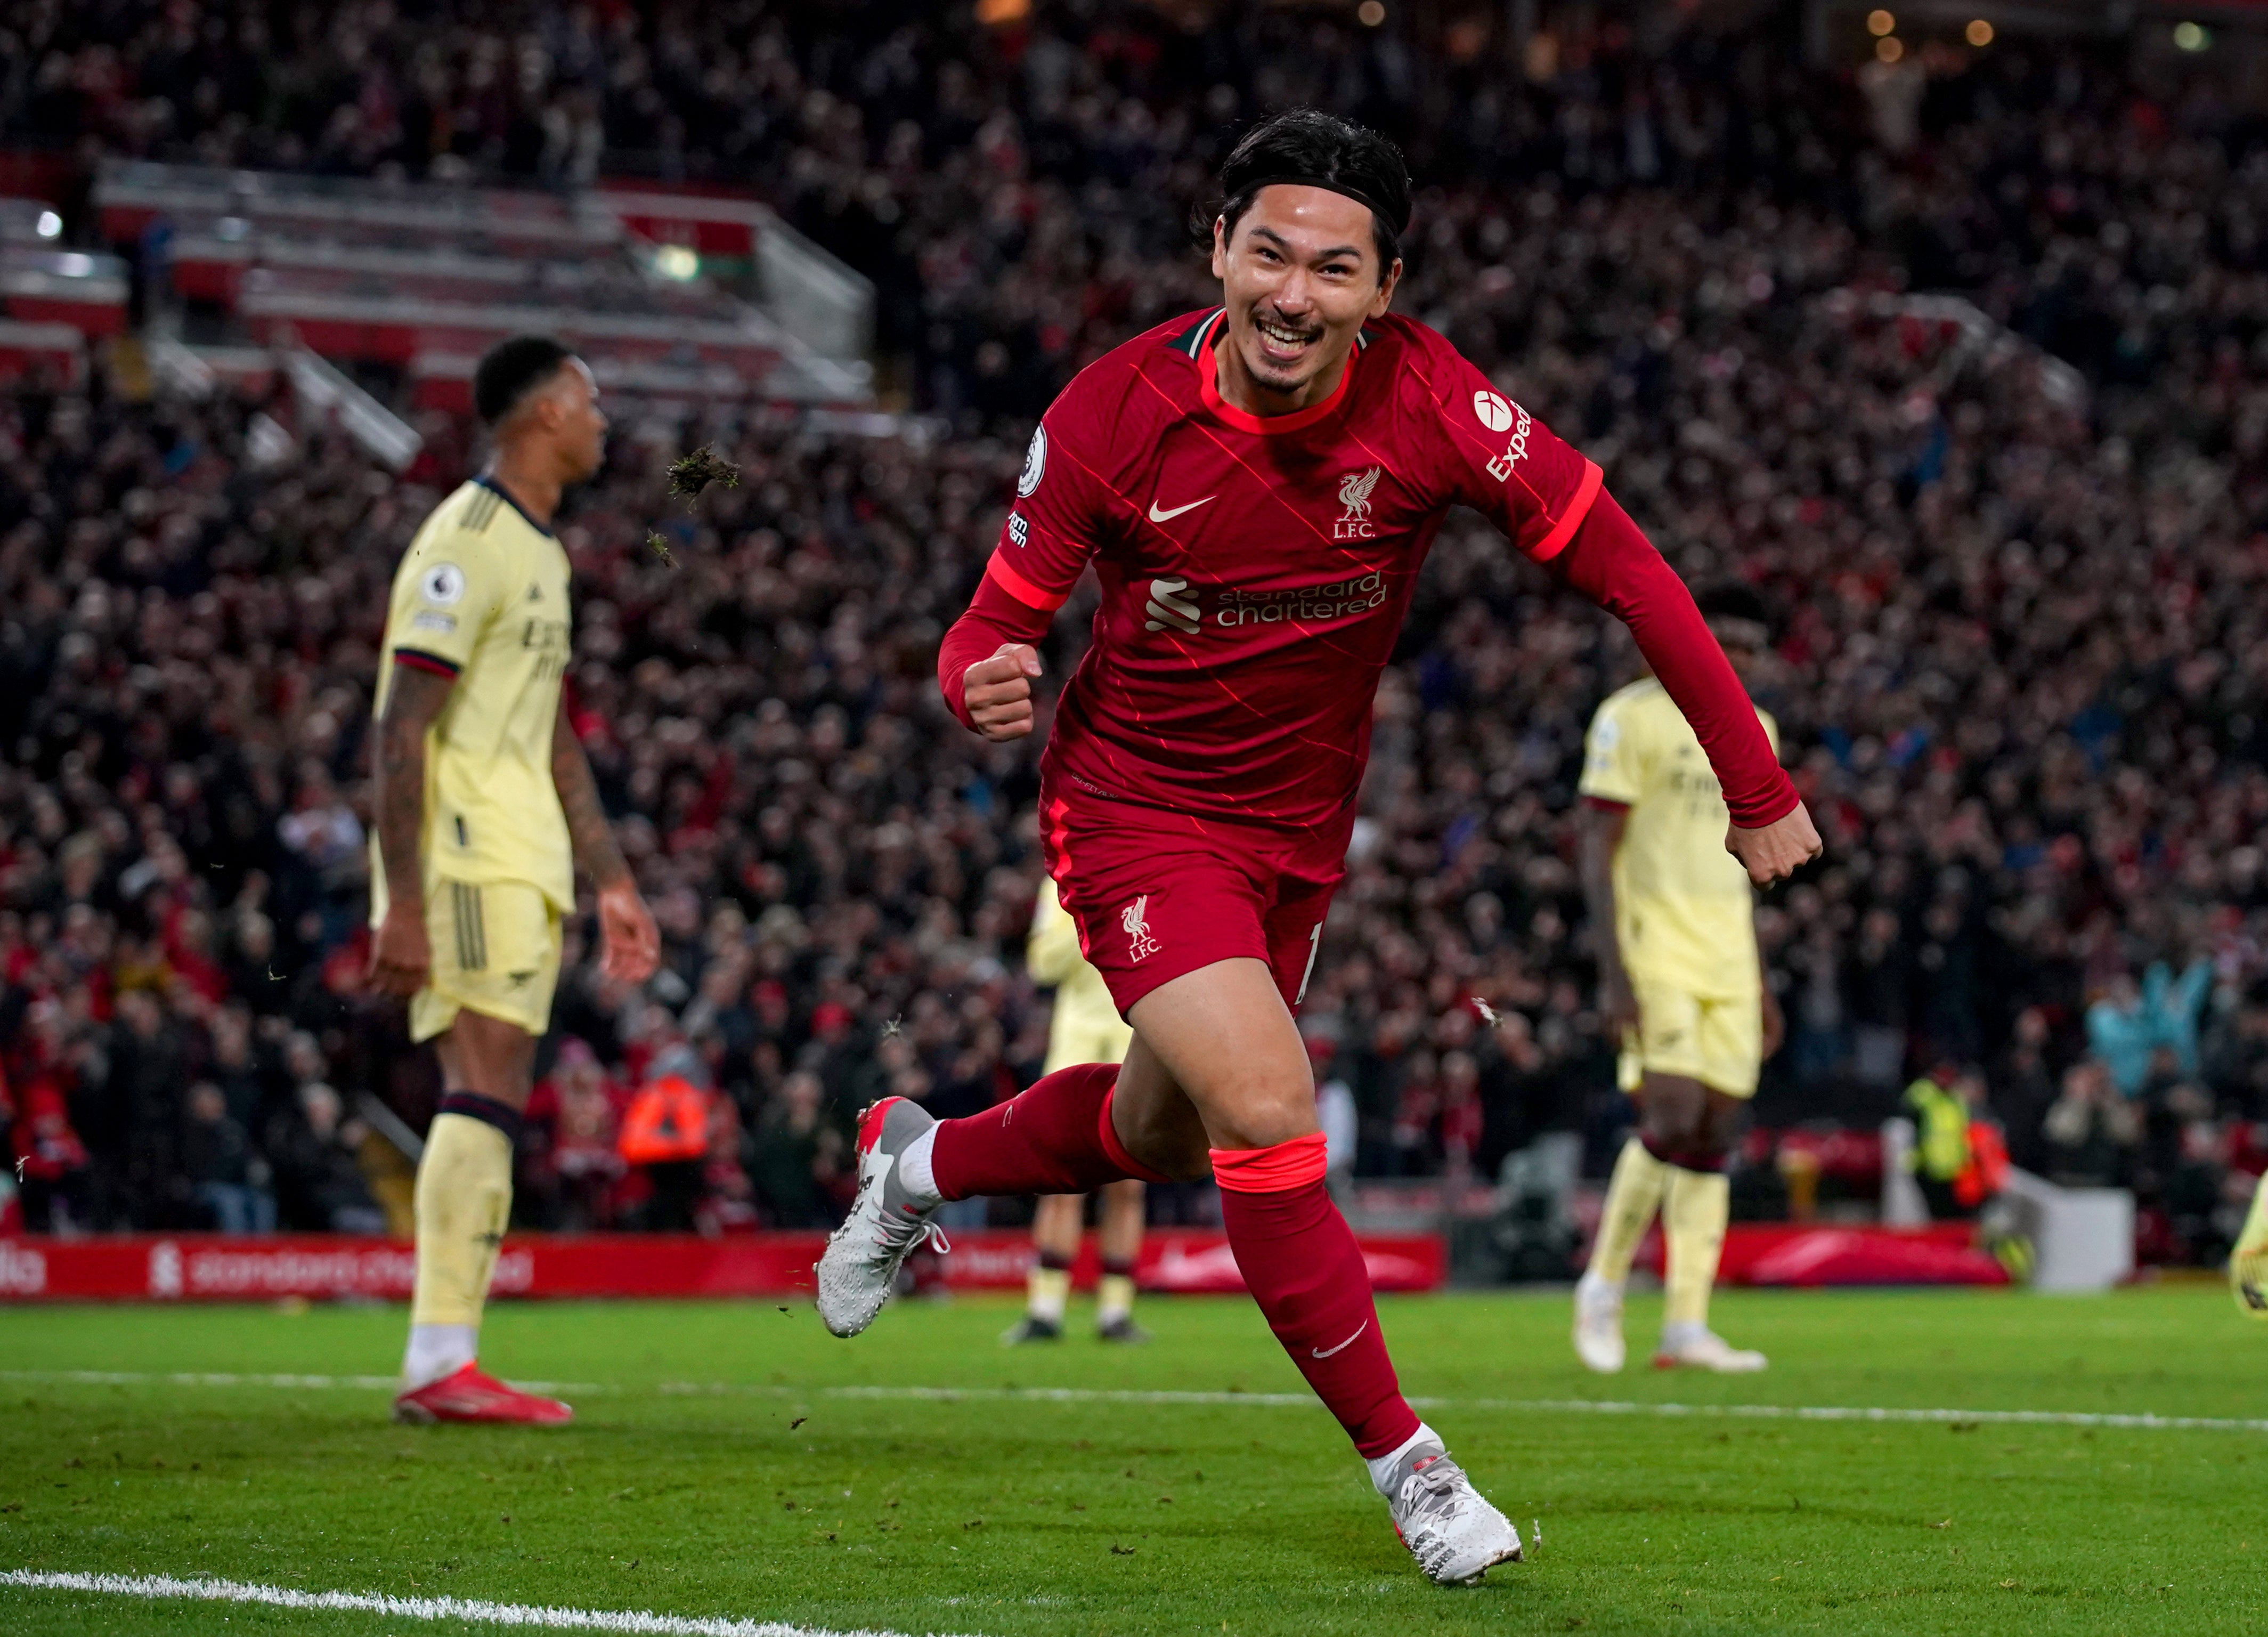 Takumi Minamino scored his first Anfield goal against Arsenal on Saturday (Peter Byrne/PA)